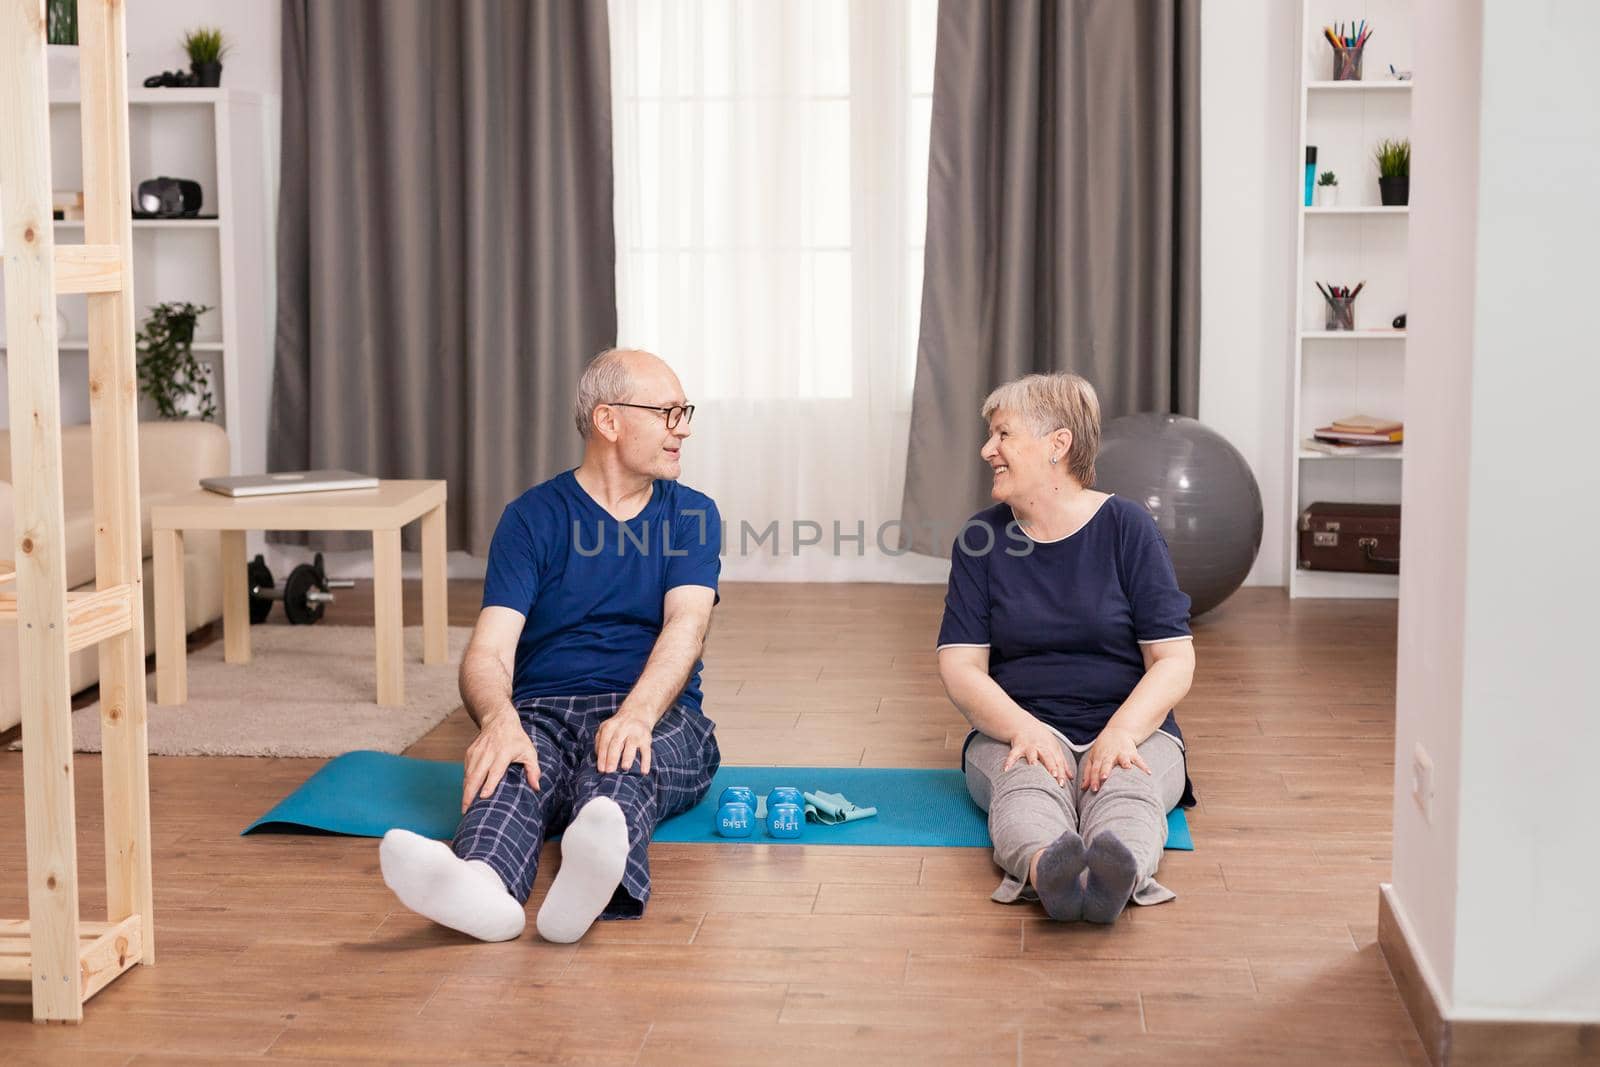 Old couple having fun doing sport in living room. Old person healthy lifestyle exercise at home, workout and training, sport activity at home on yoga mat.